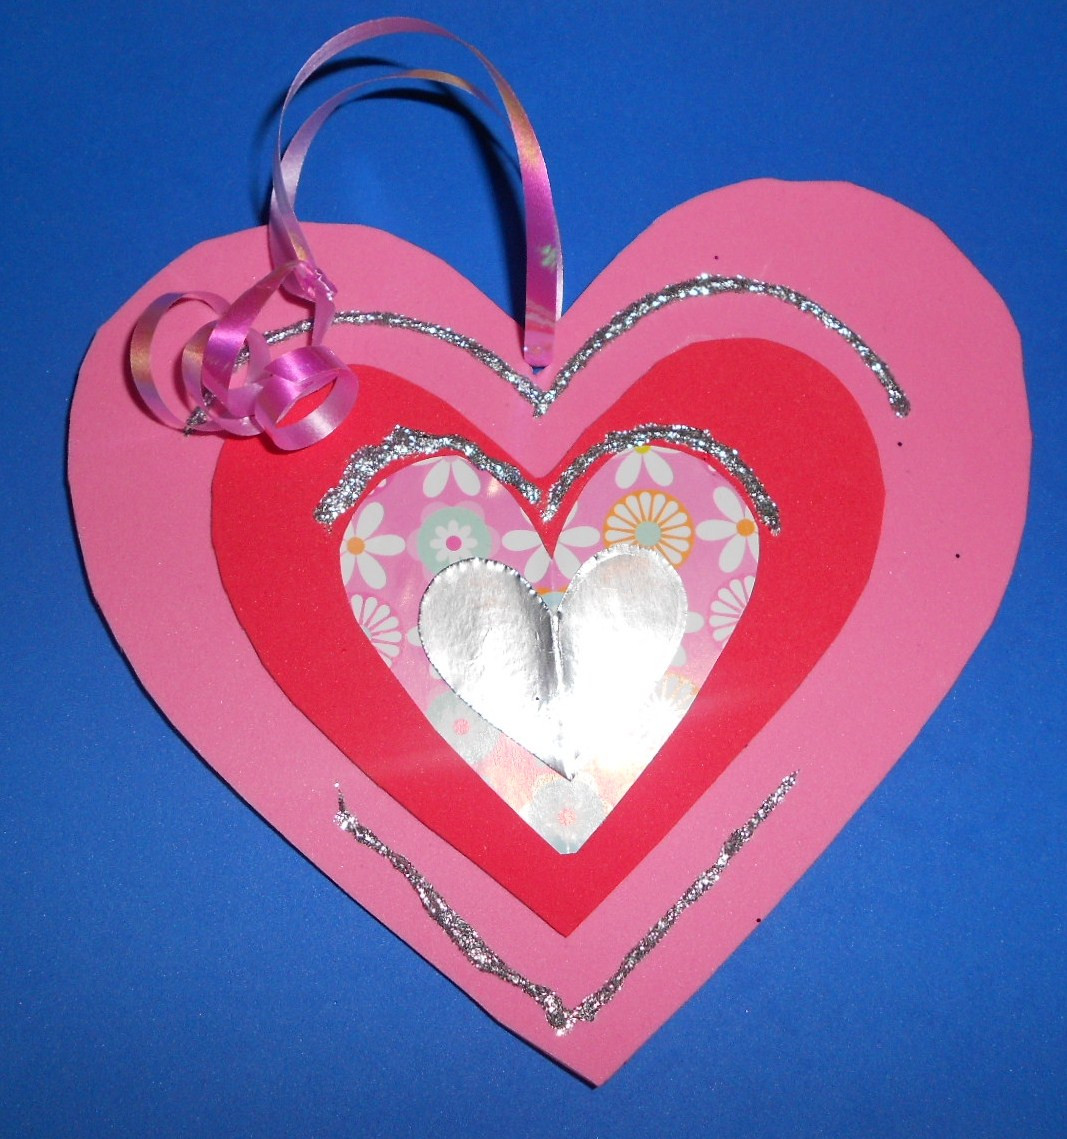 Valentine Arts And Crafts For Preschoolers
 James&May Arts and Crafts Blog Valentine s Day Craft Page